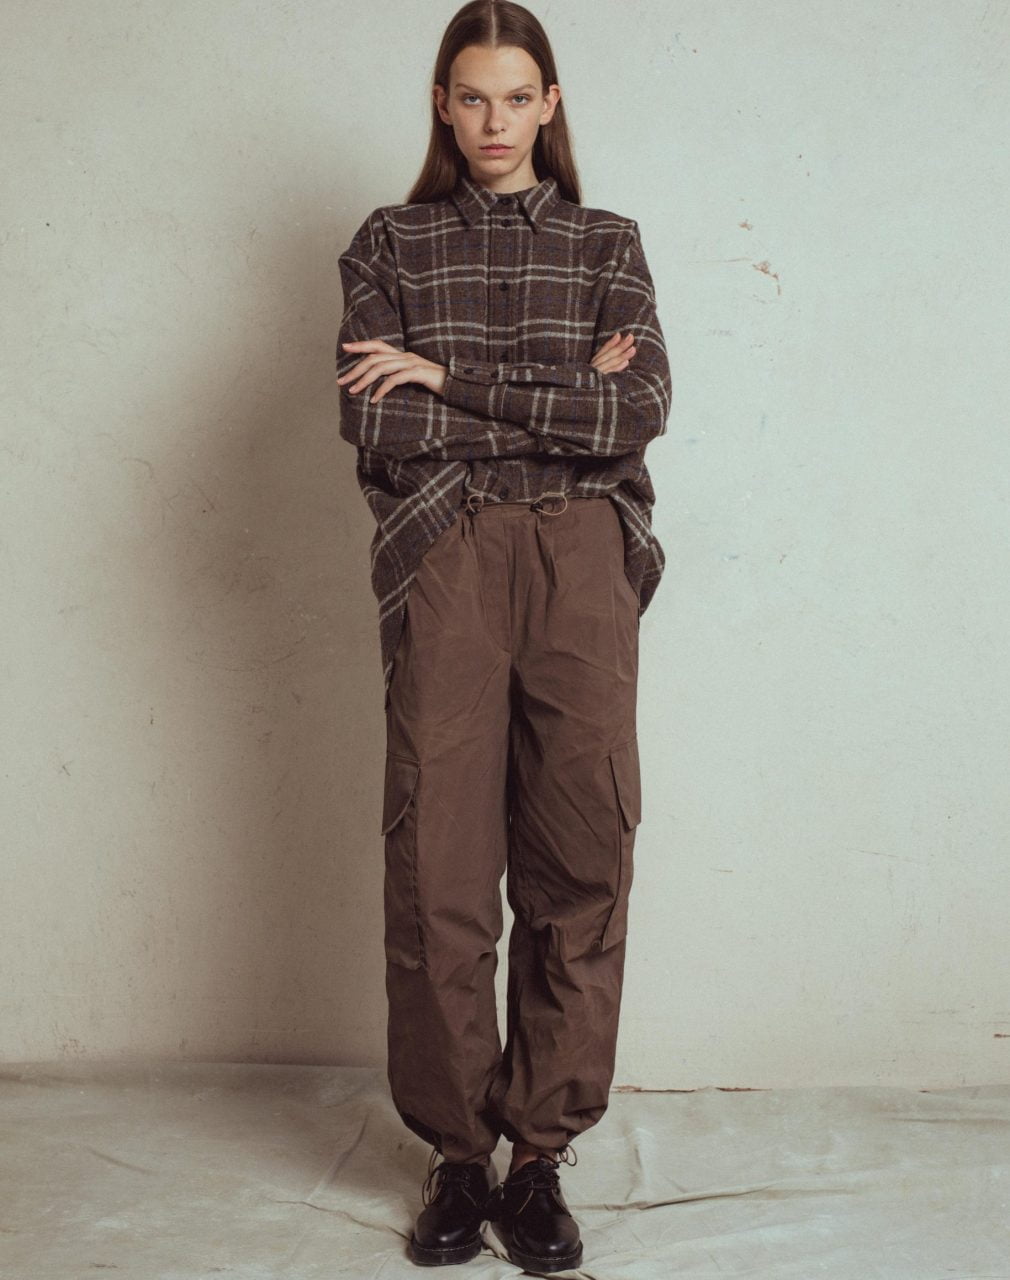 cargo pants millet, italian stif fabric 70% polyamide, 30% cotton, loose straight fit, wide trousers with big side pockets, waistband and bottom gathered with elastic strap.